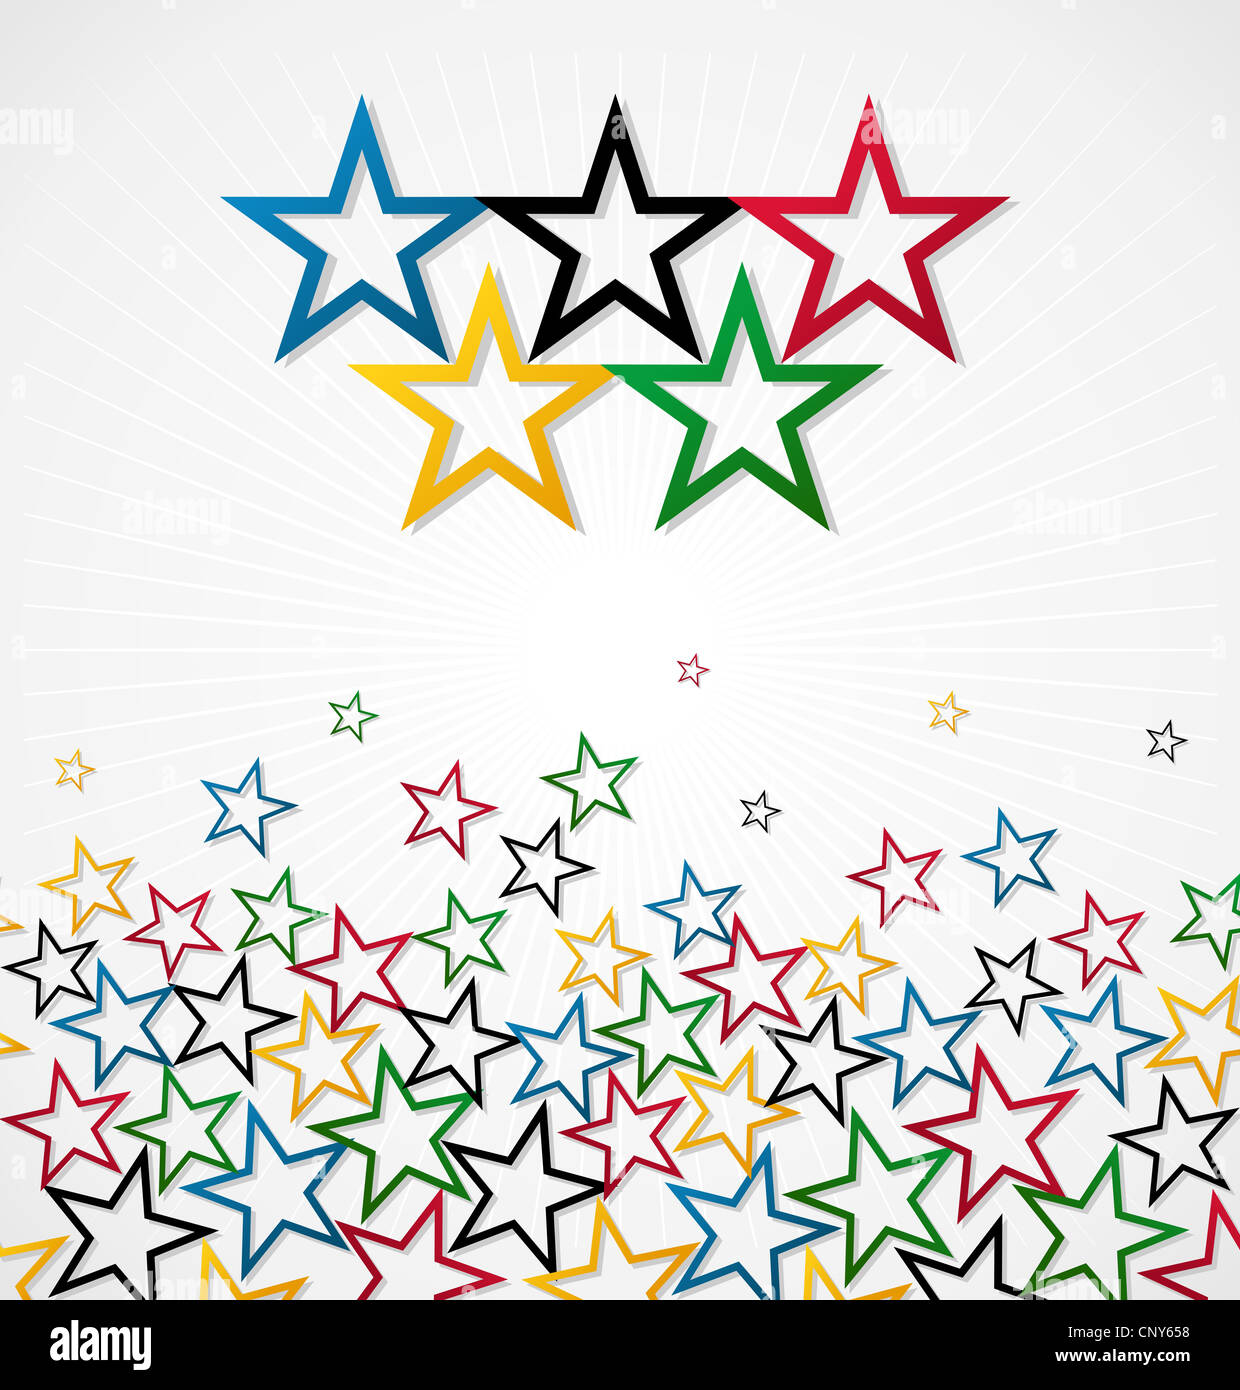 London Olympics games stars background. Vector file layered for easy manipulation and customisation. Stock Photo